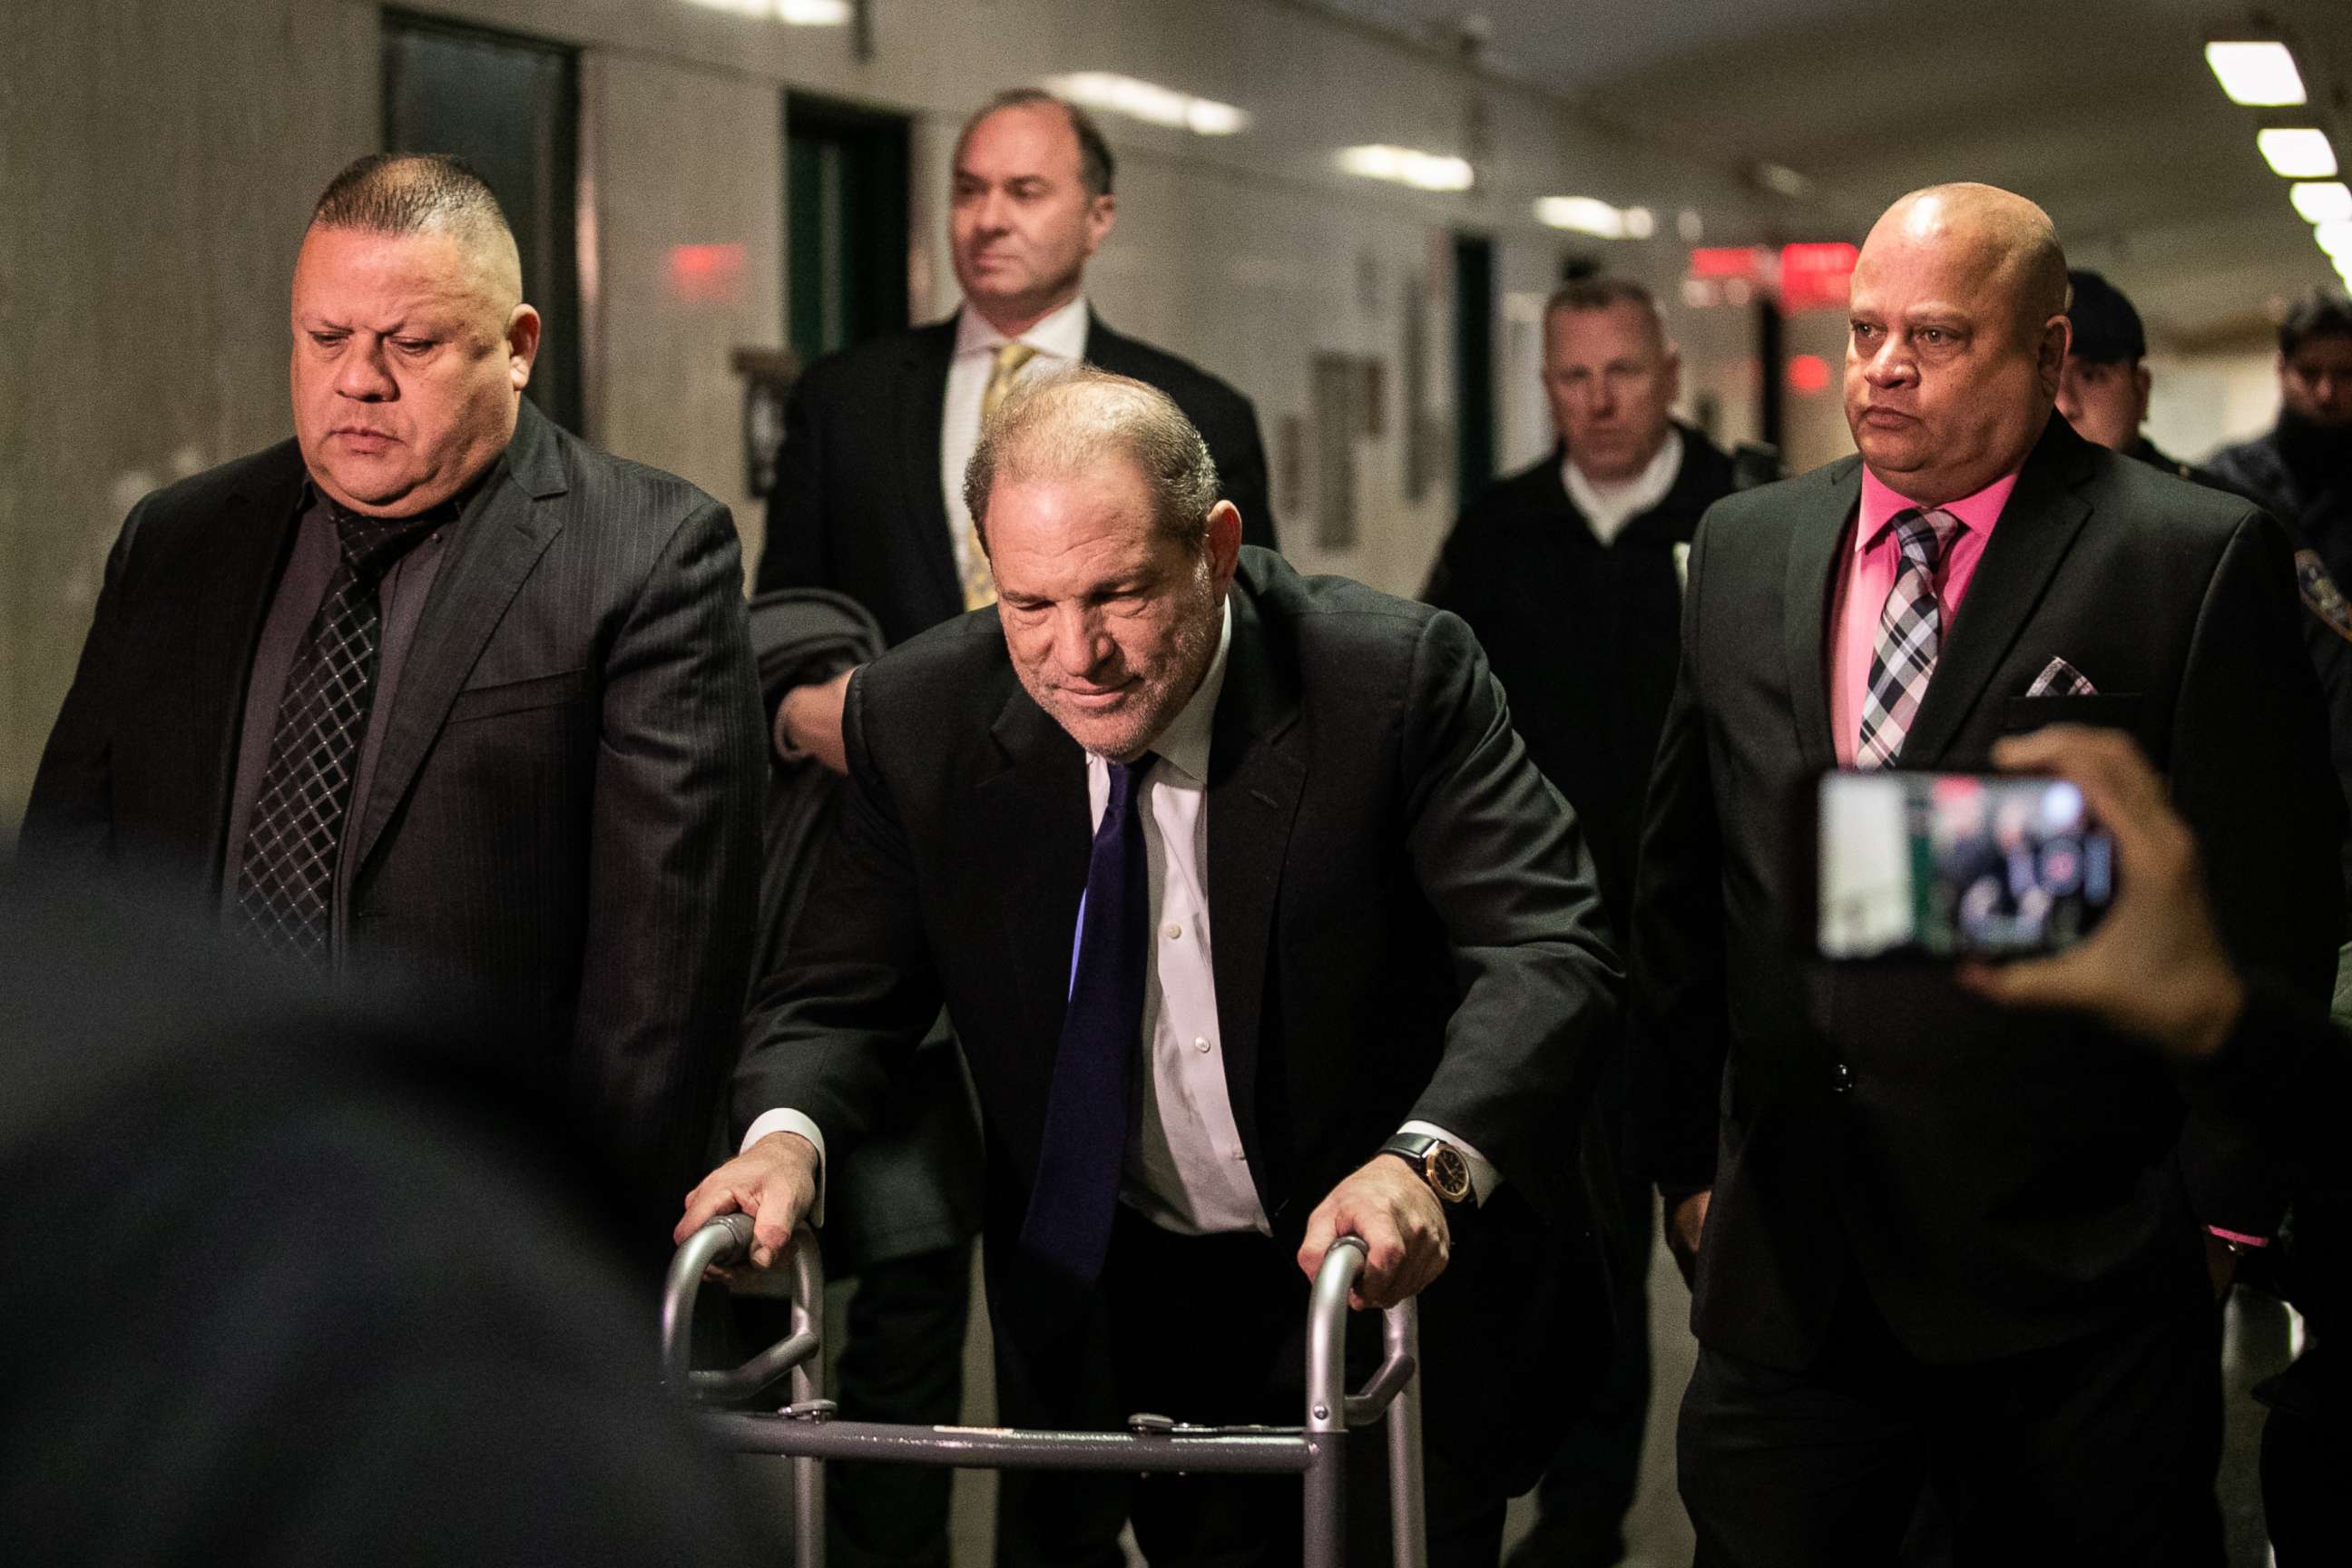 PHOTO: Movie producer Harvey Weinstein arrives at criminal court for a bail hearing related to his sexual assault case on Dec. 11, 2019 in New York City.